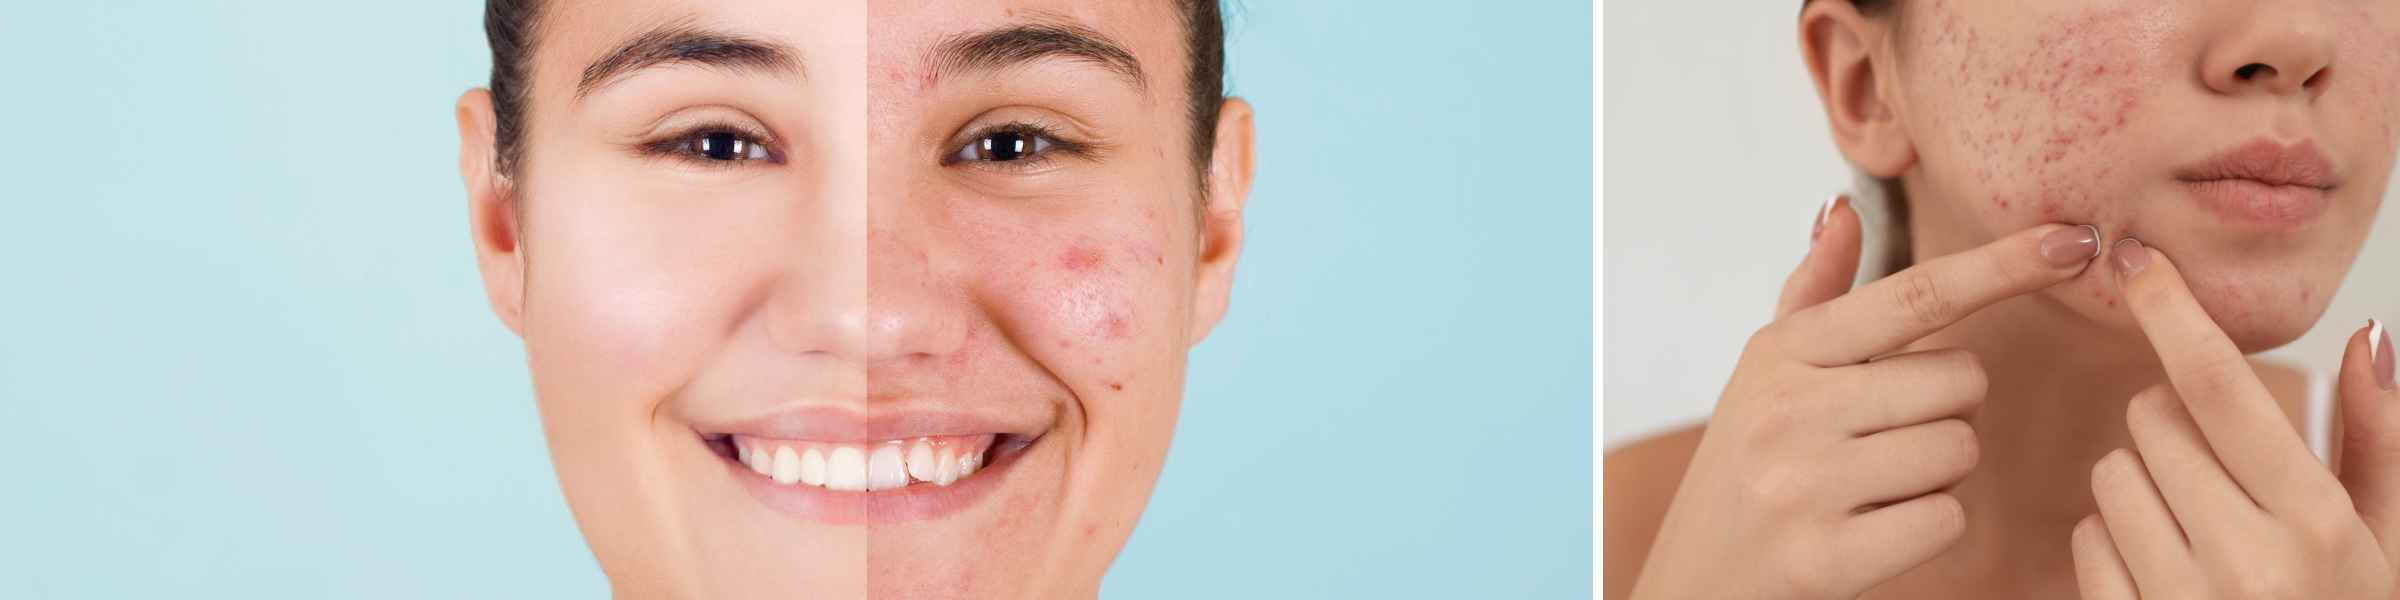 Fight against Acne